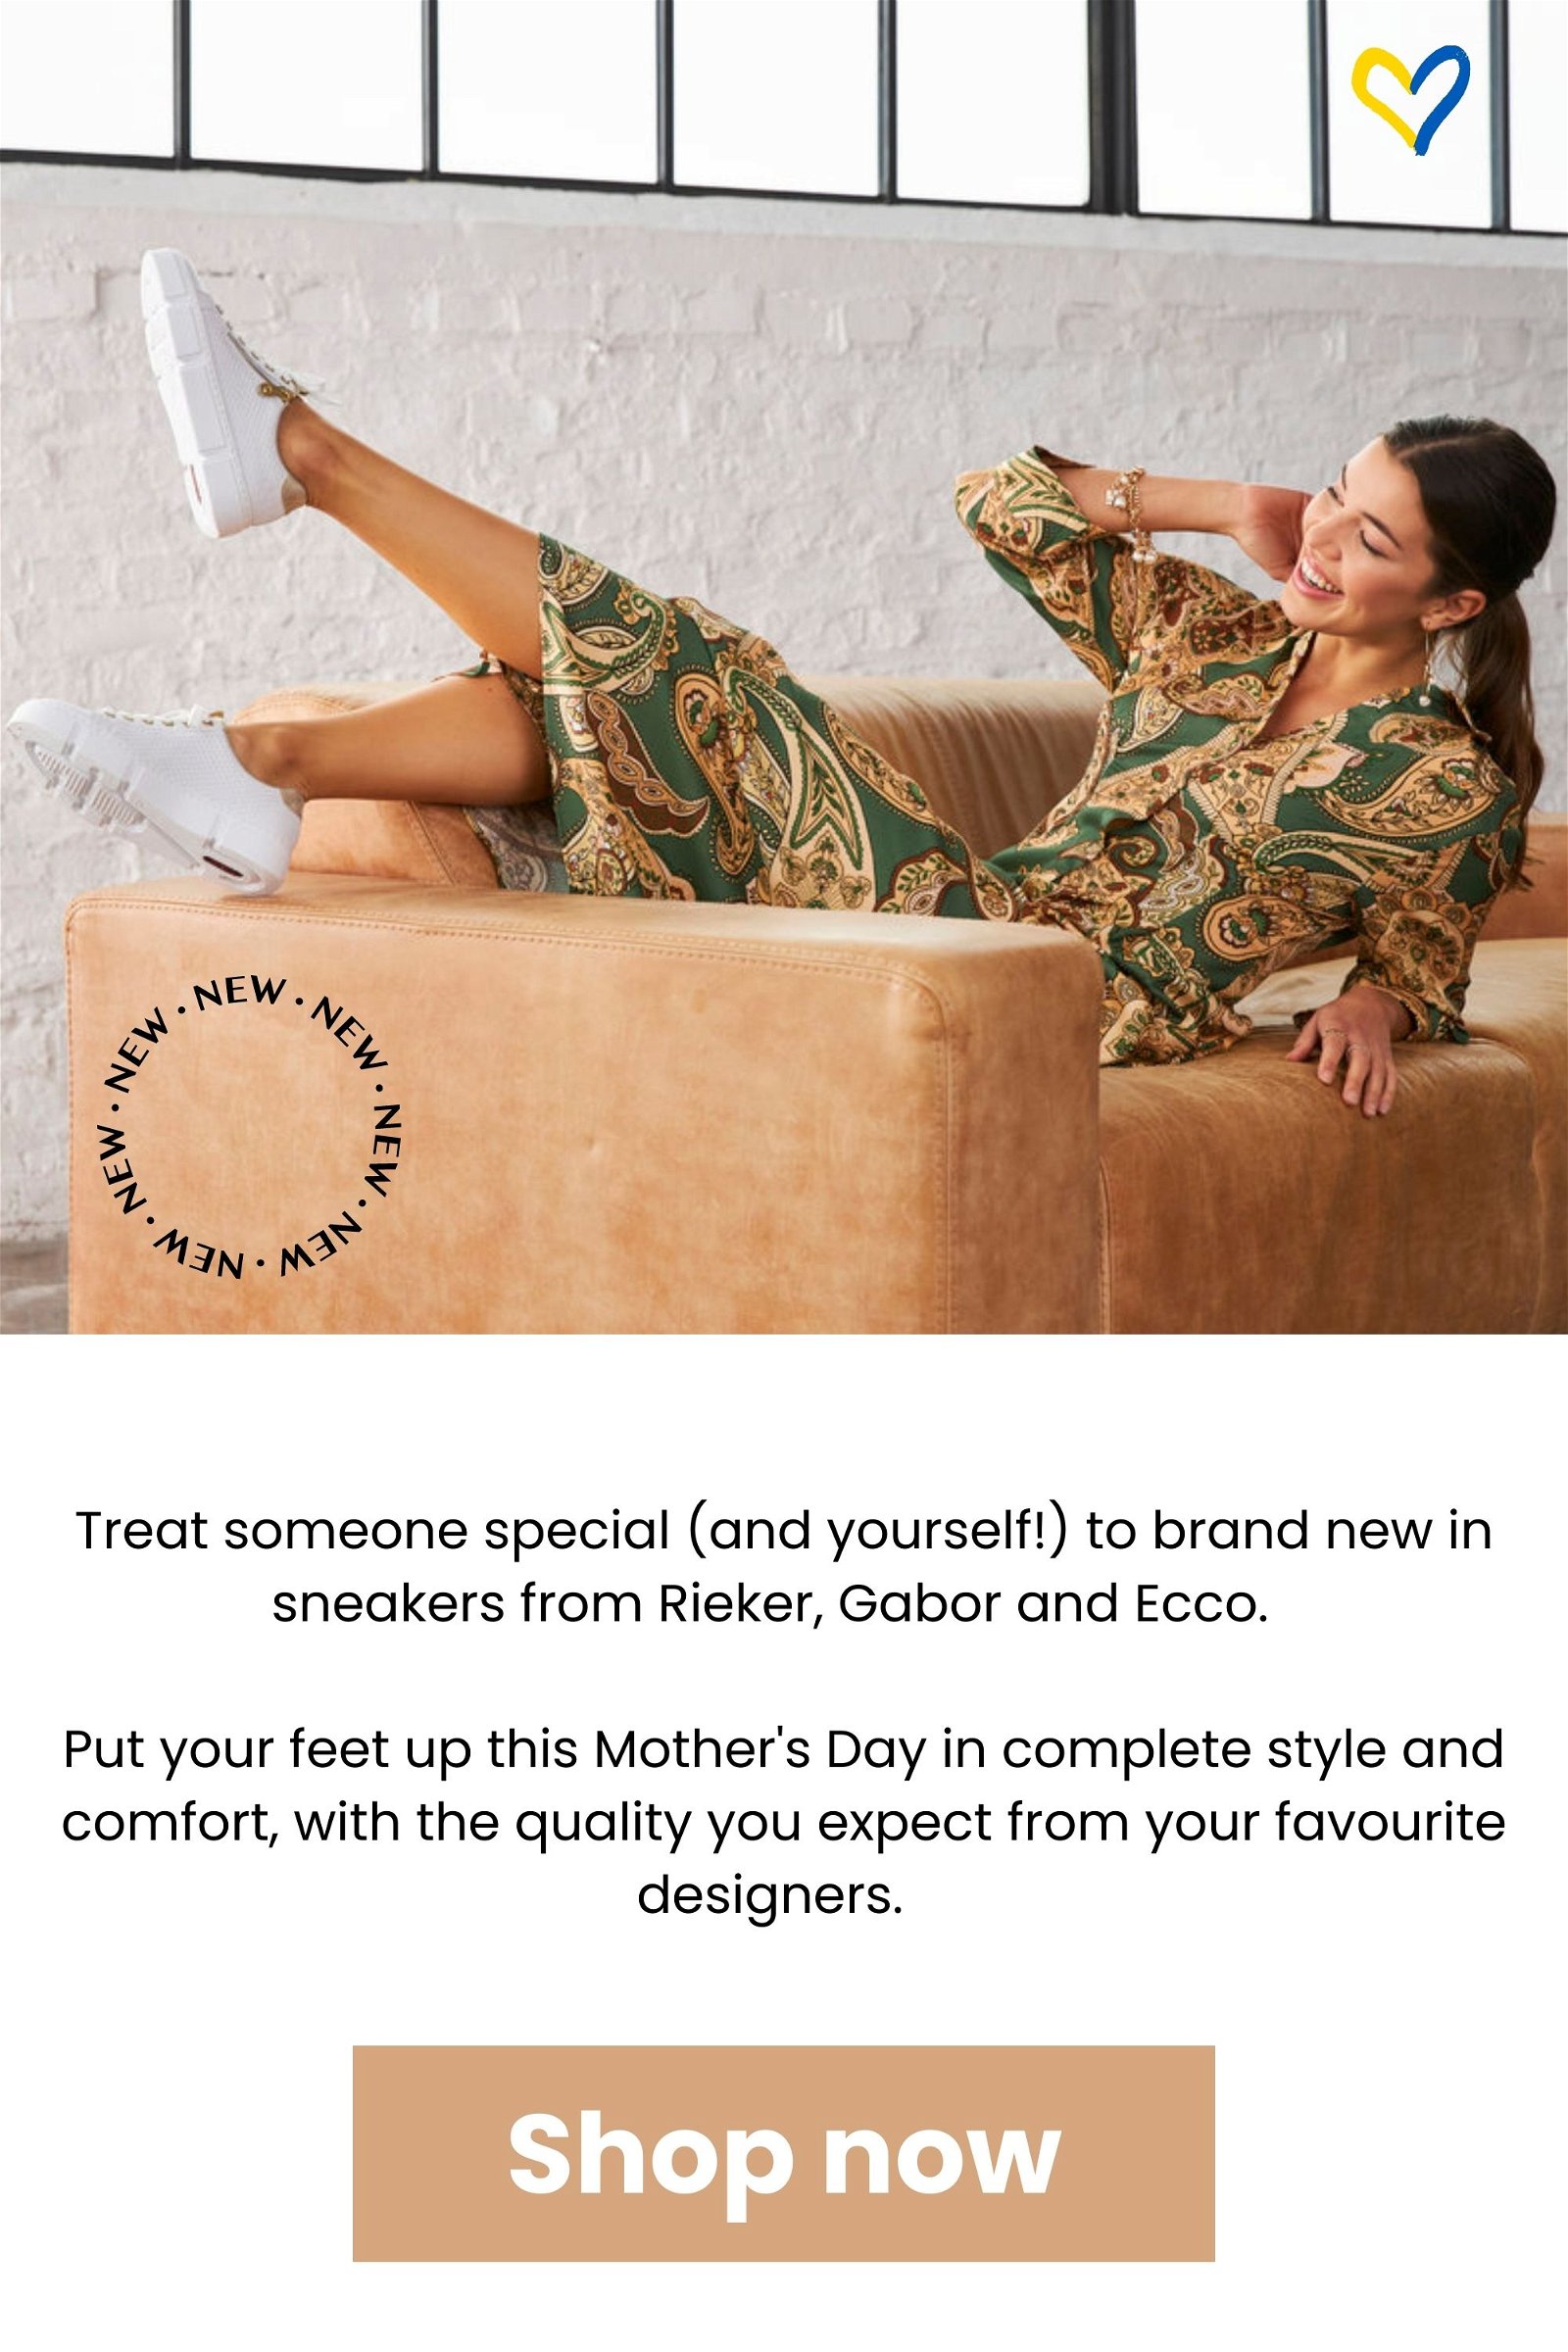 Mozimo sneakers and trainers from Rieker, Gabor and Ecco